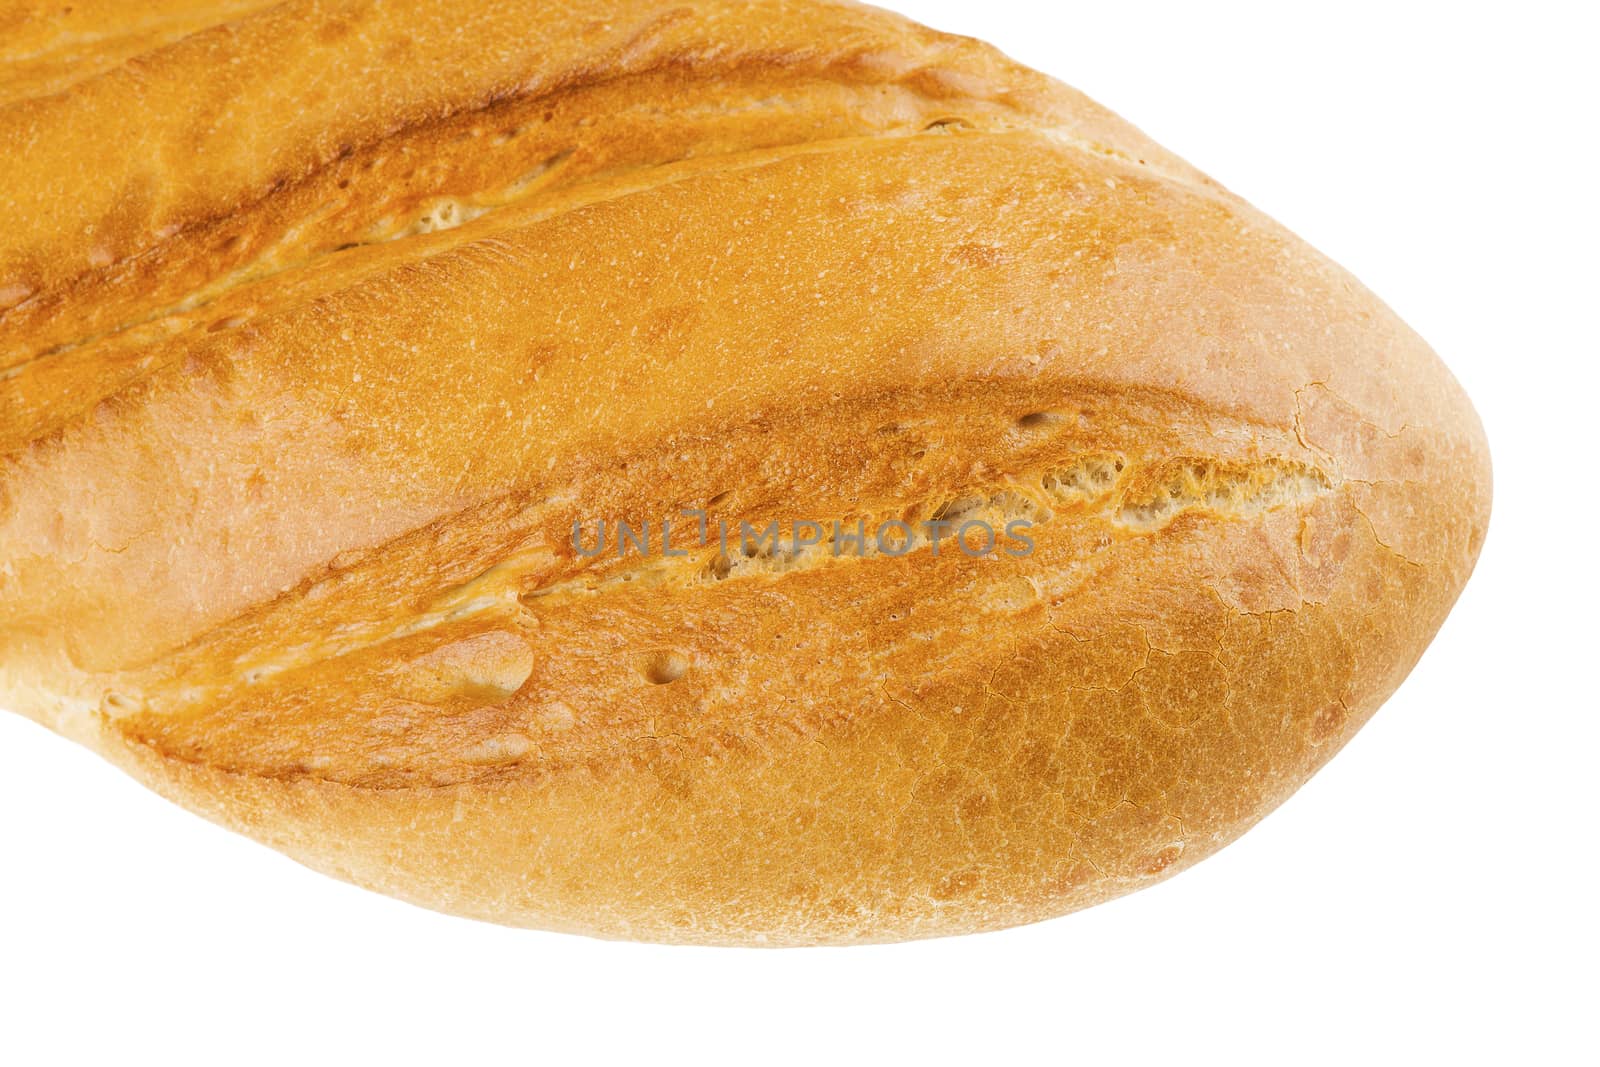 white bread close-up isolated on white background